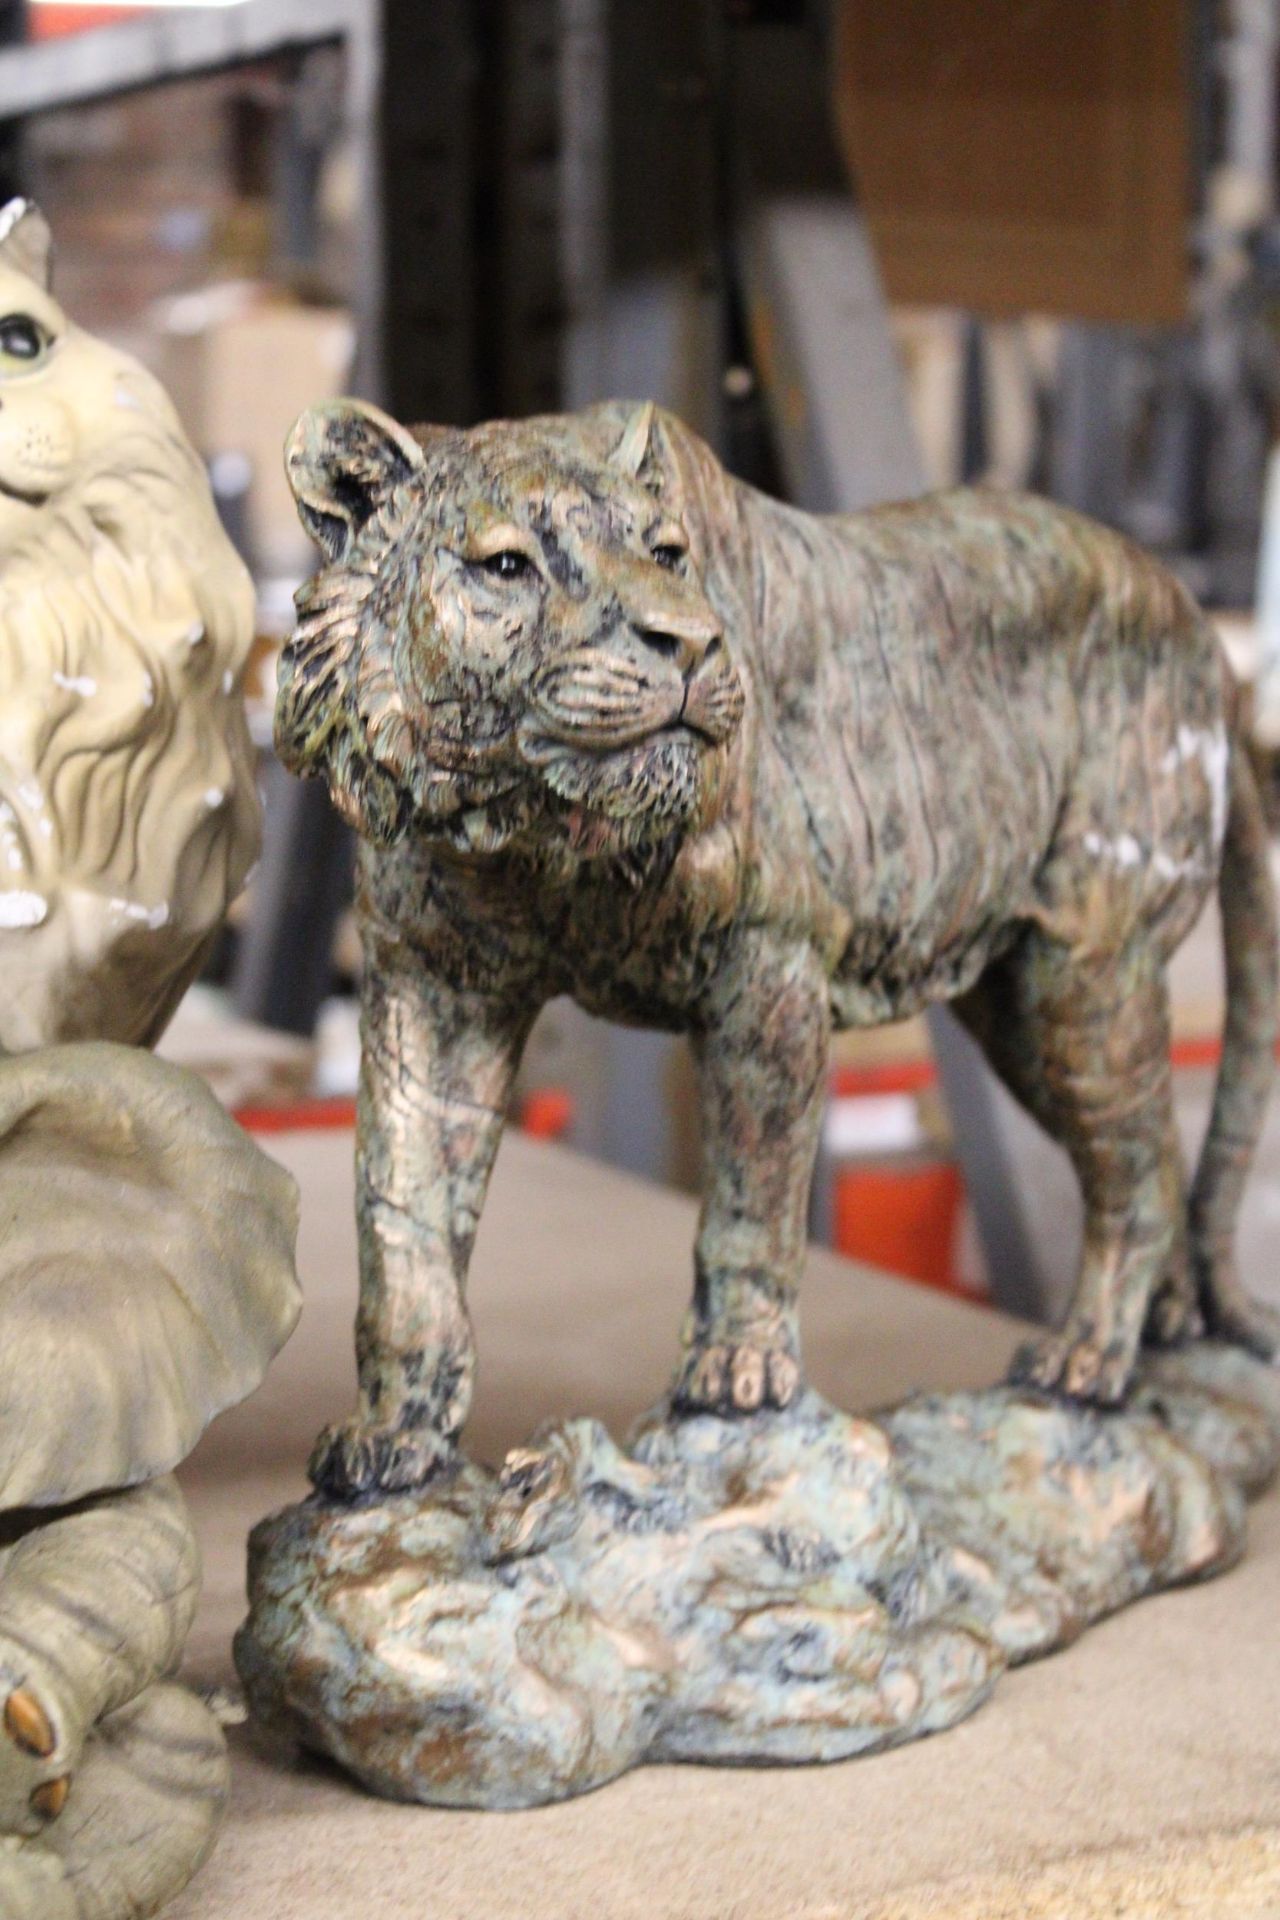 THREE LARGE ANIMAL FIGURES TO INCLUDE A TIGER, PERSIAN CAT AND ELEPHANT - Image 3 of 4